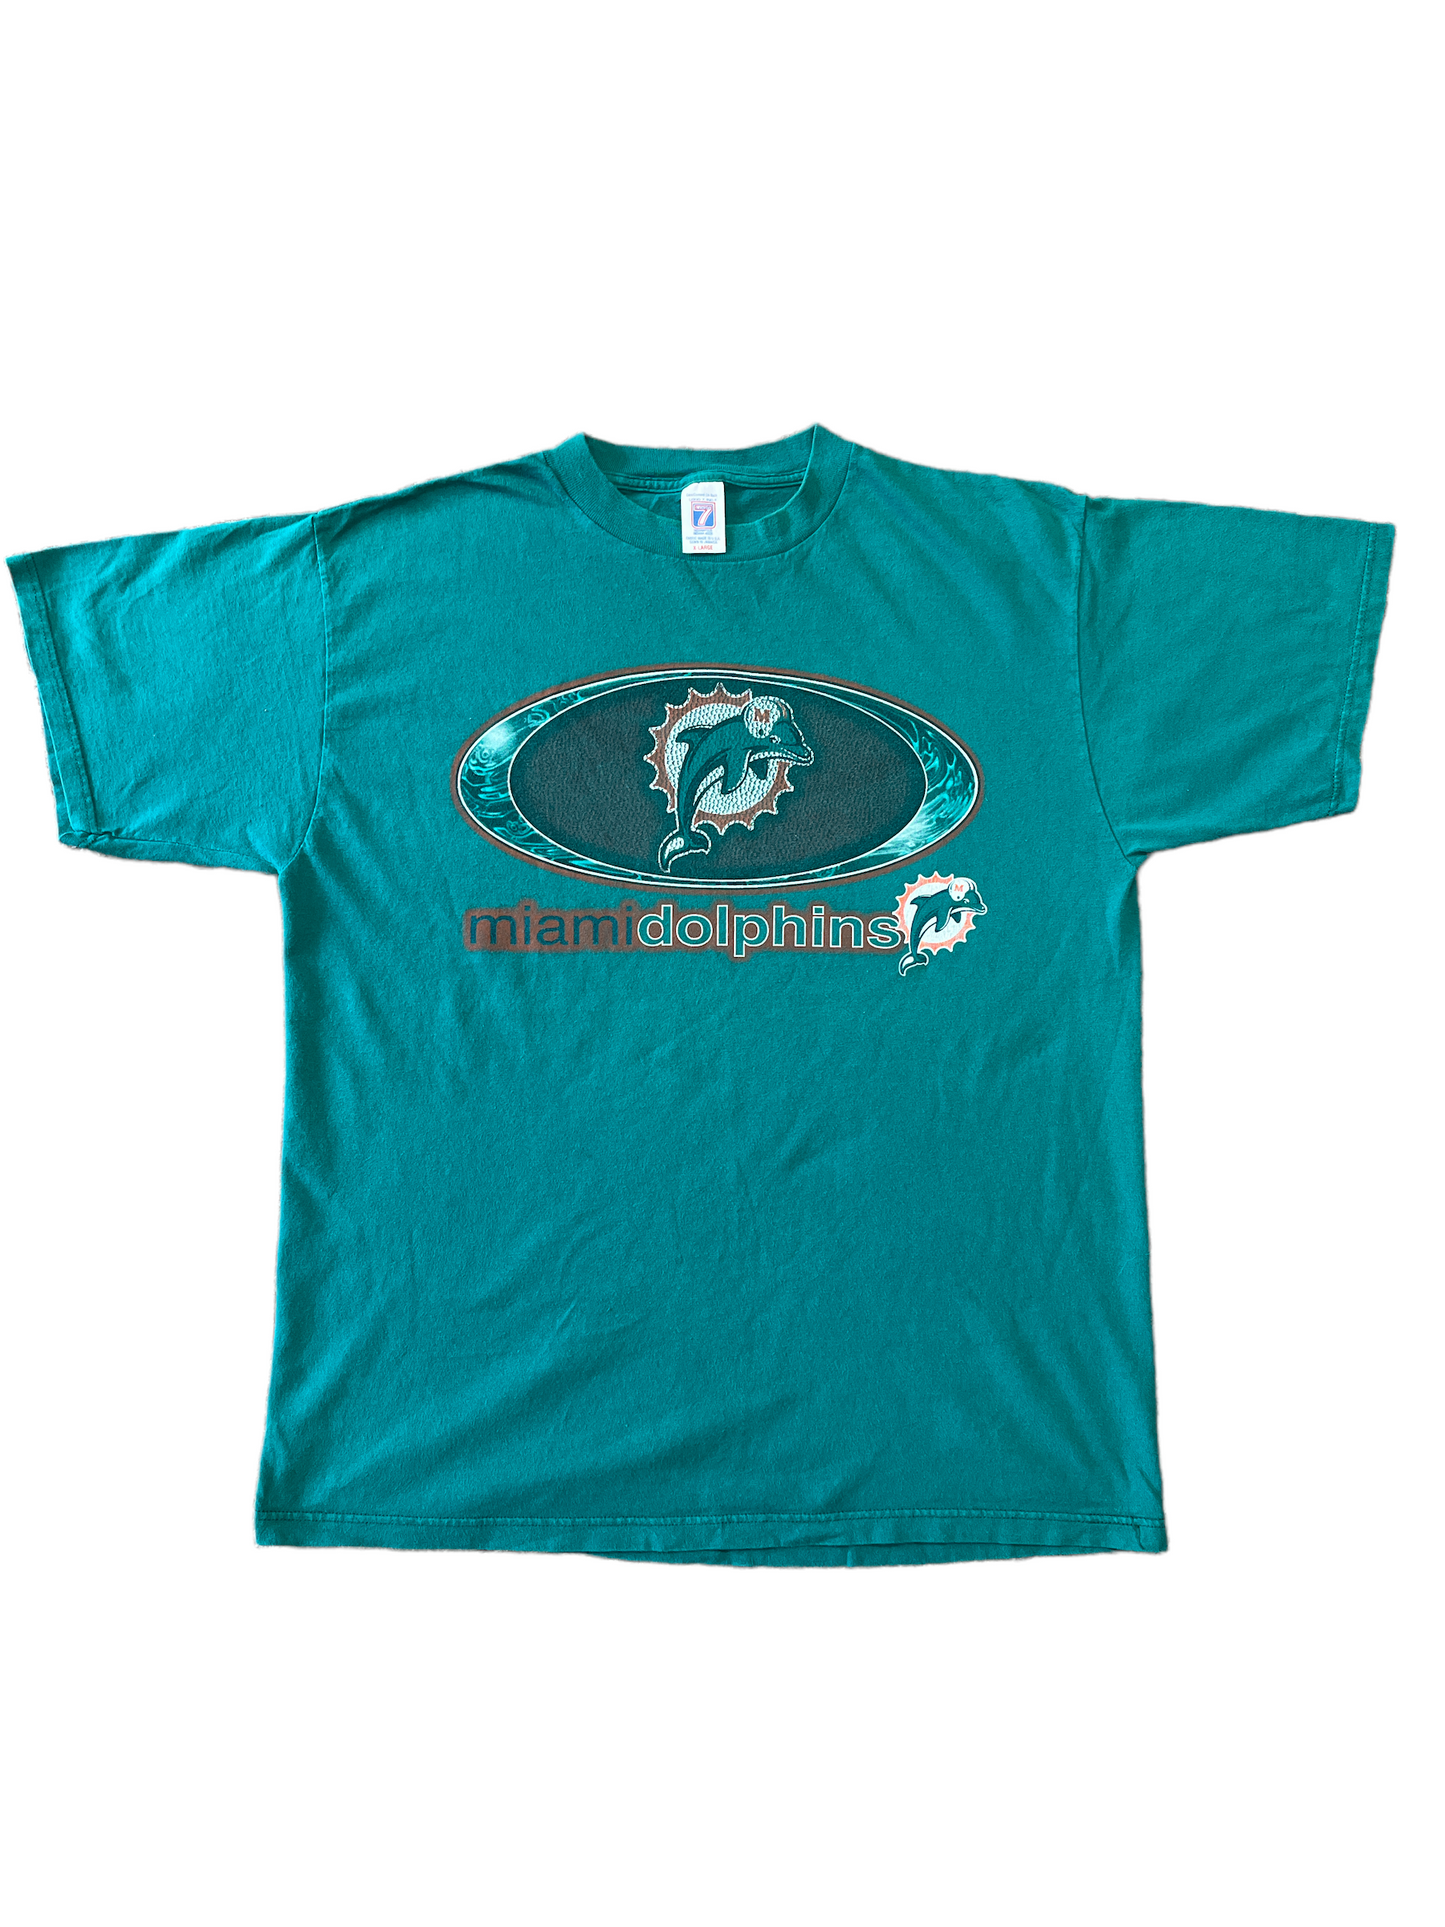 Vintage 1990s Dolphins Tee - Size XL